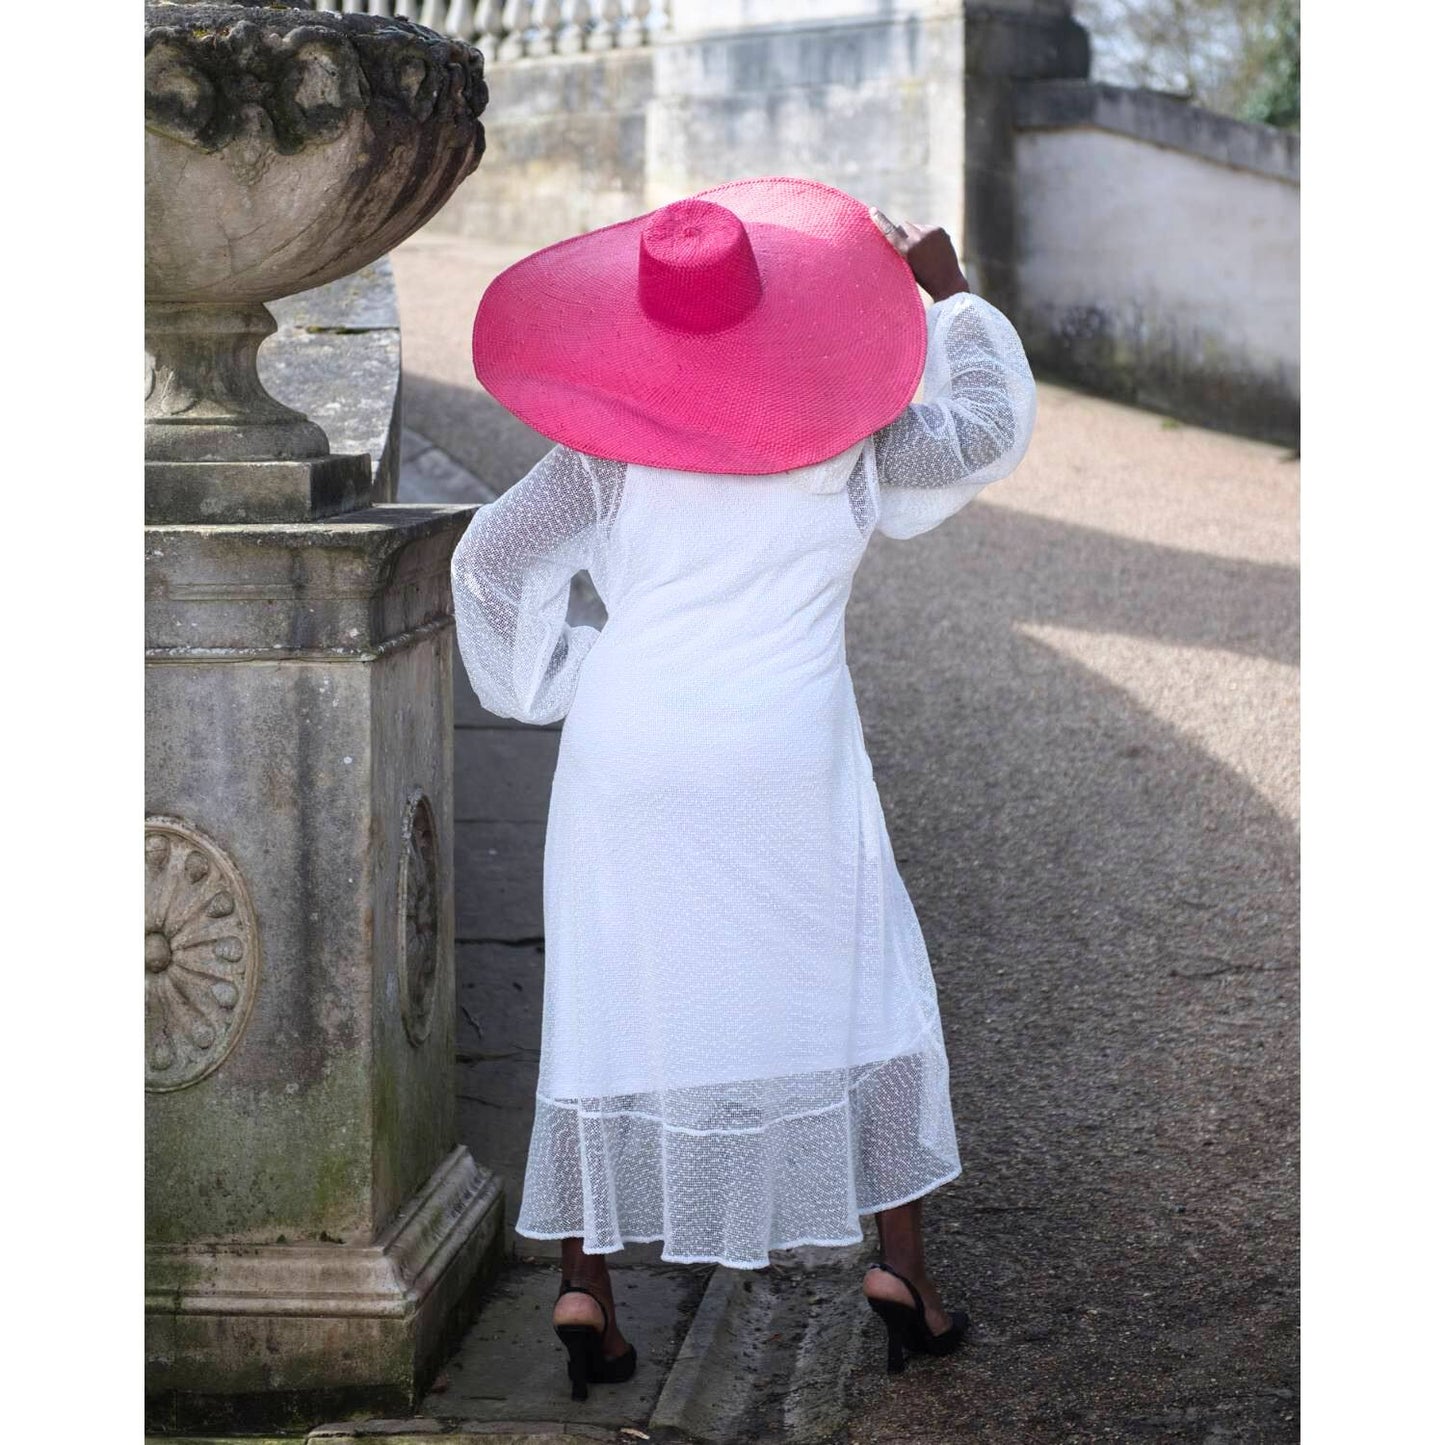 Women's Plus Size Aphrodite White Holiday Resort Dress with hoodie and white undergarment shown from the back, paired with a pink sunhat and black heels.